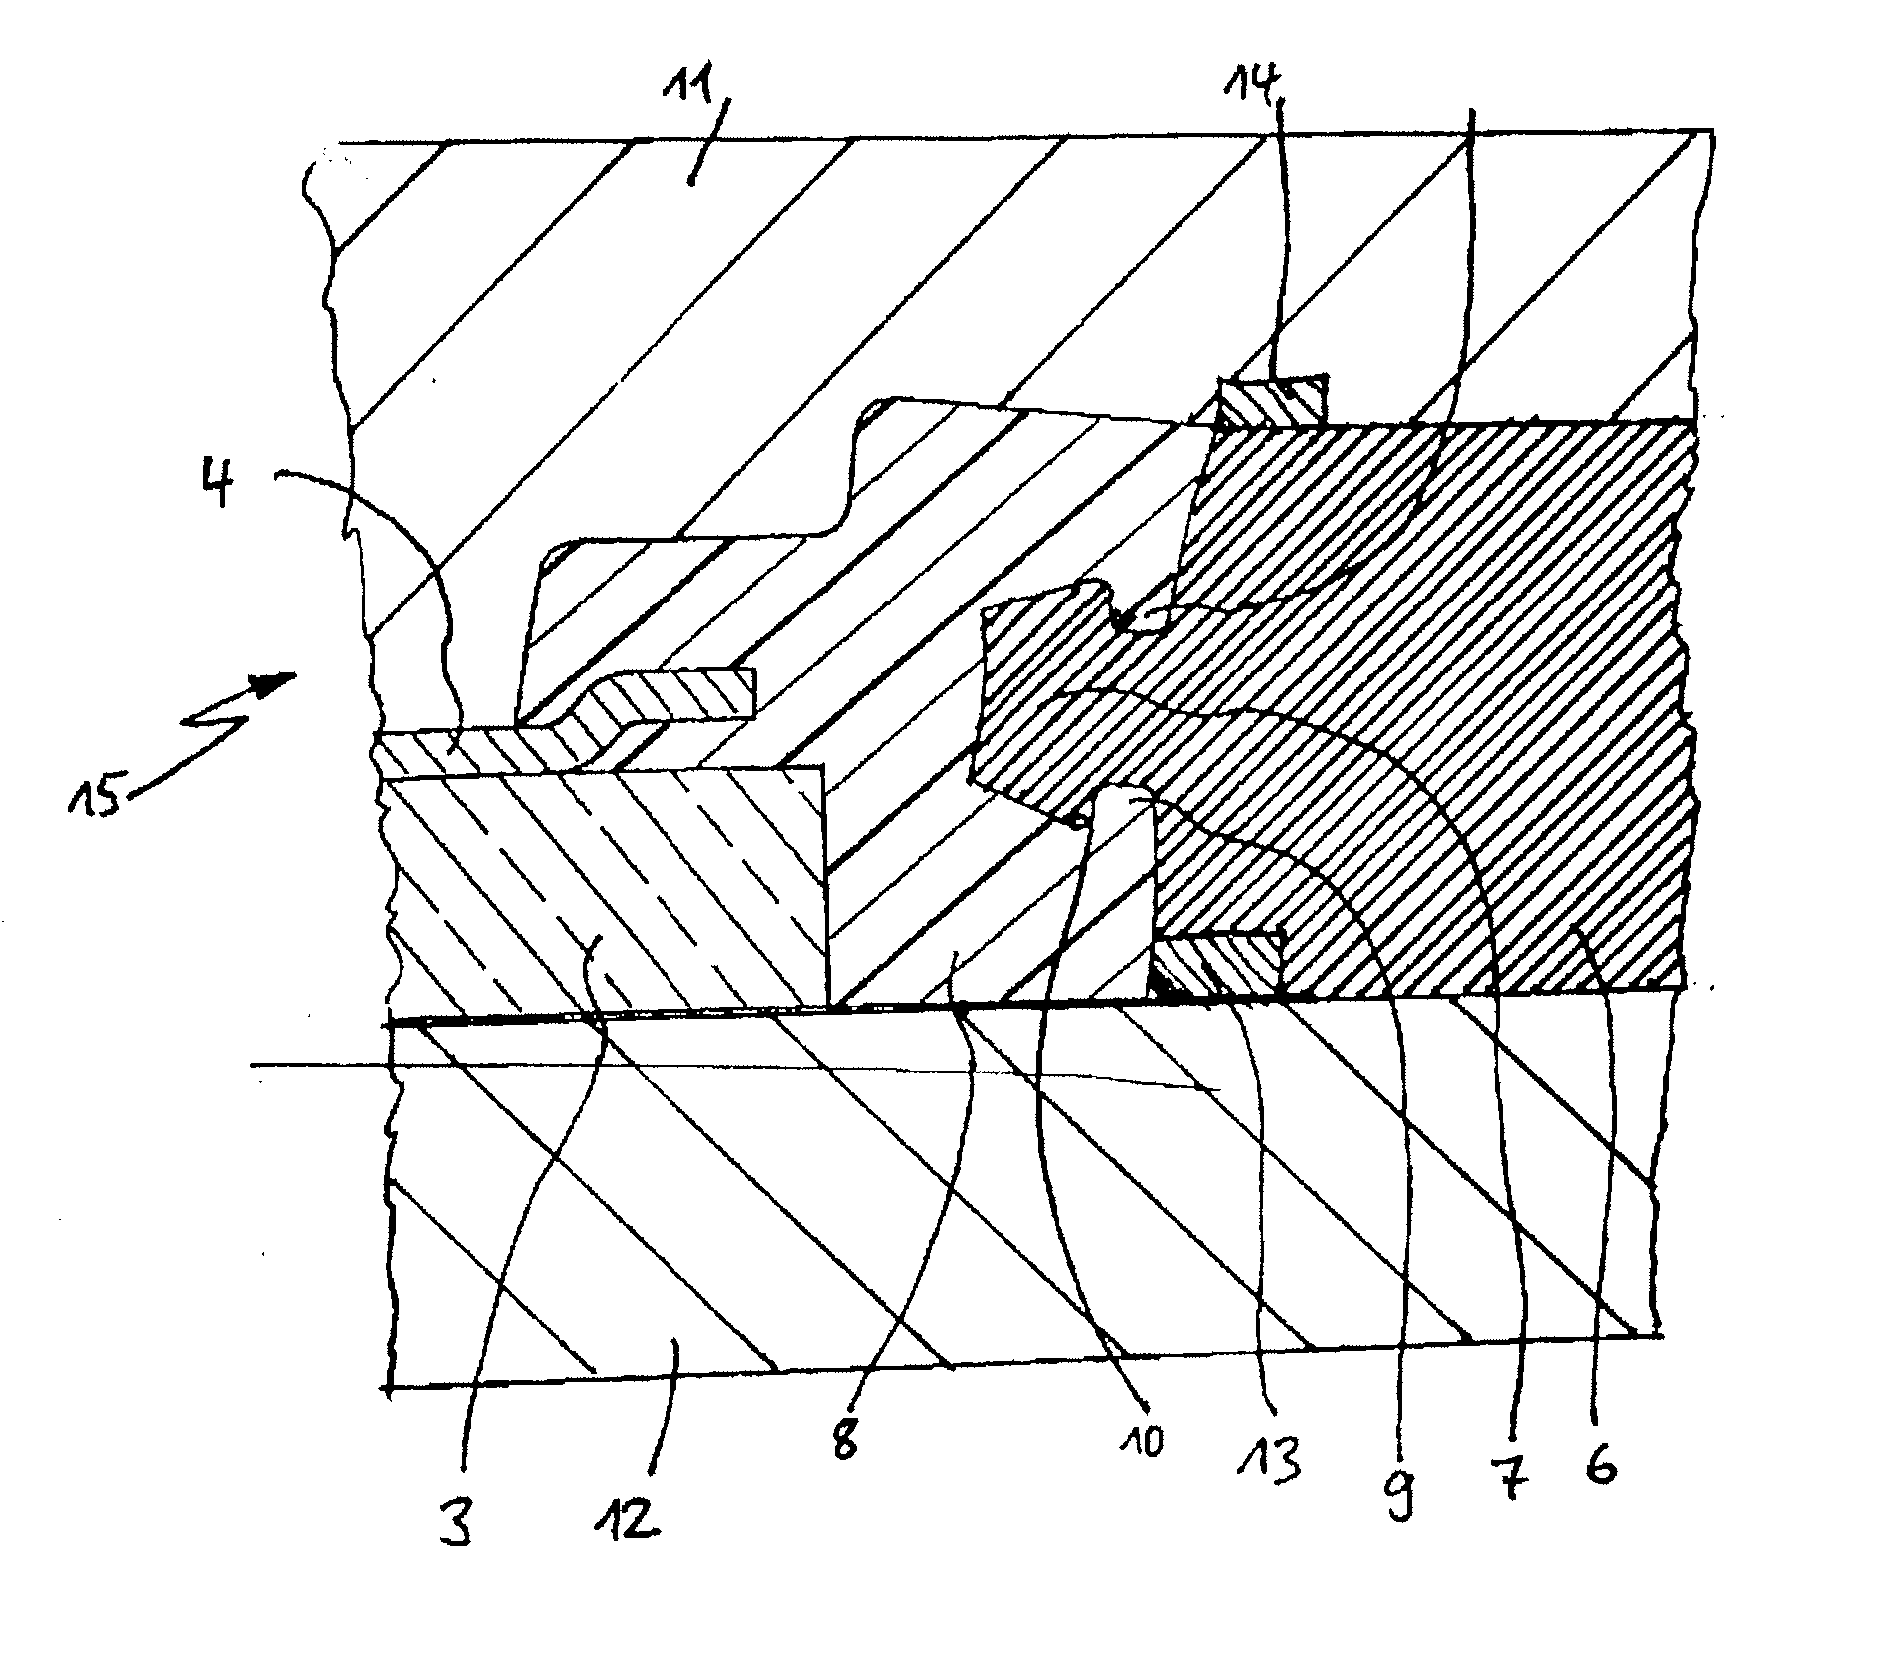 Mould And Method For Producing A Panel That Is Embedded In Or Surrounded By Injection -Moulded Or Expanded Plastic